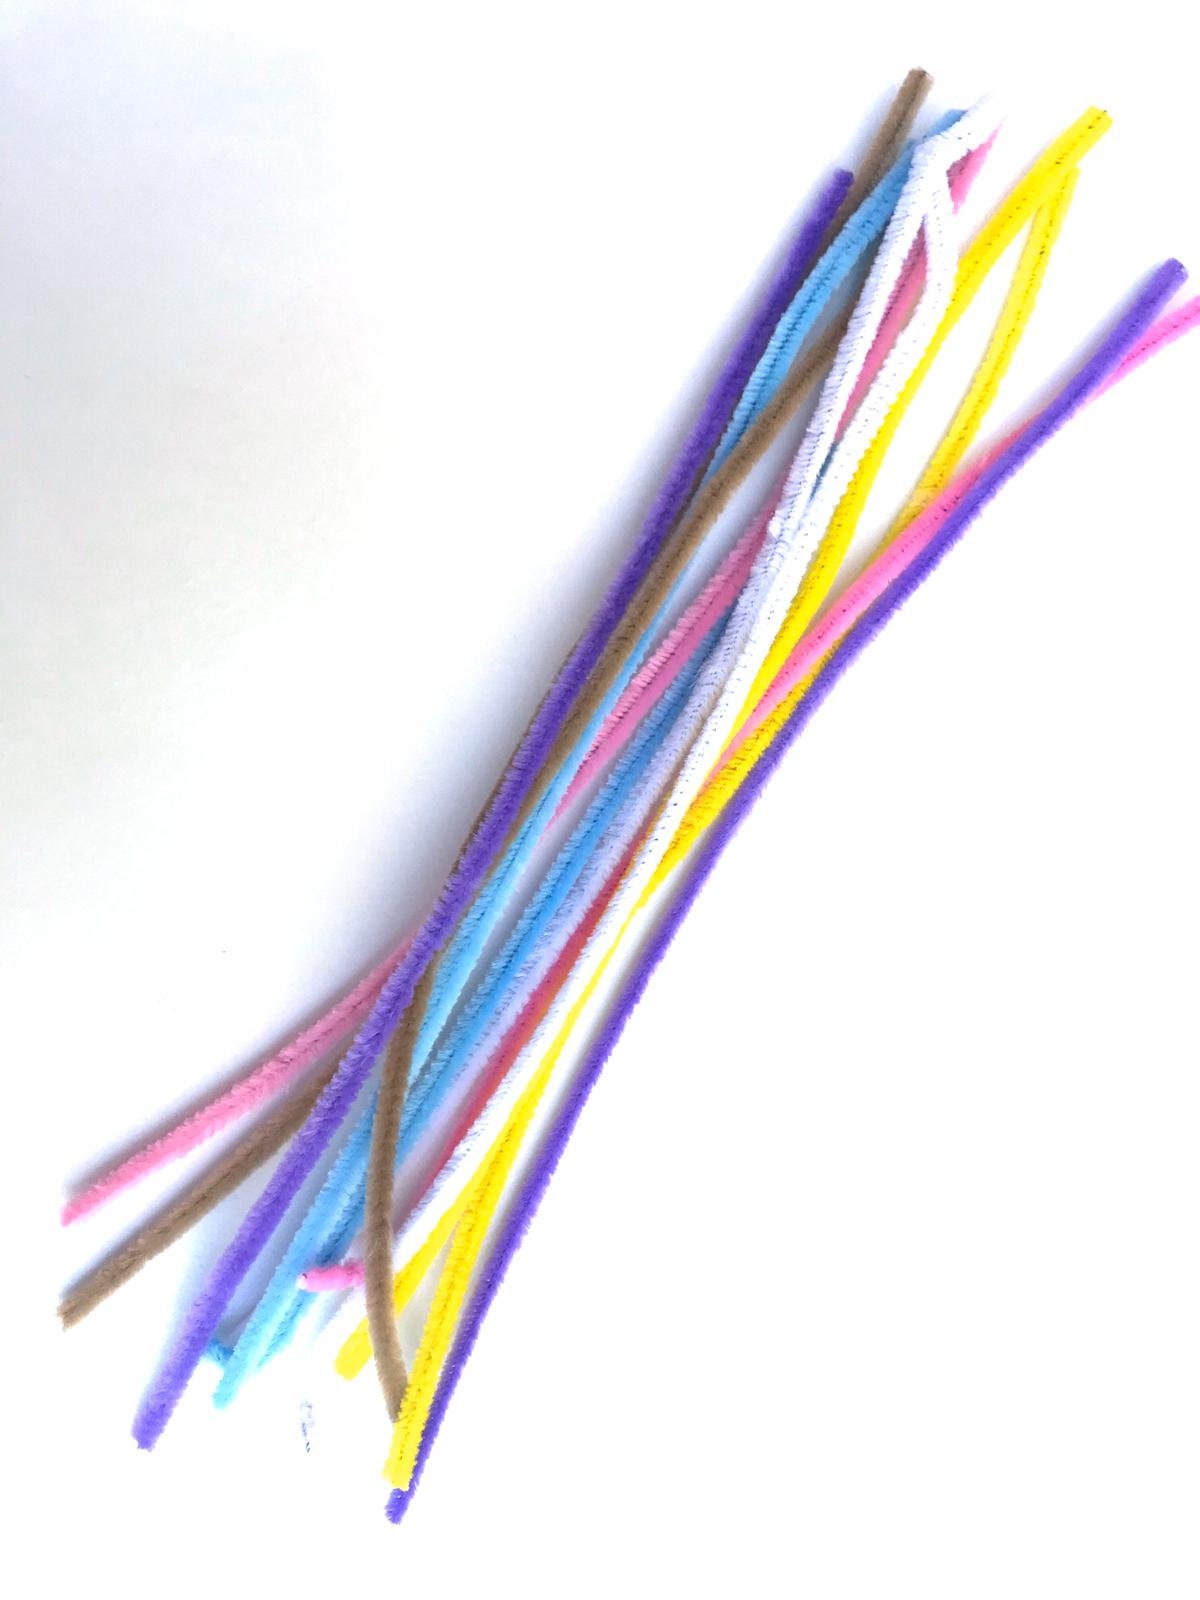 Pastel Pipe Cleaners, 30cm Long Chenille Stems, Assorted, Scrapbooking,  Card Making, Children's Craft Box Supply, 10/20/40 Pieces 